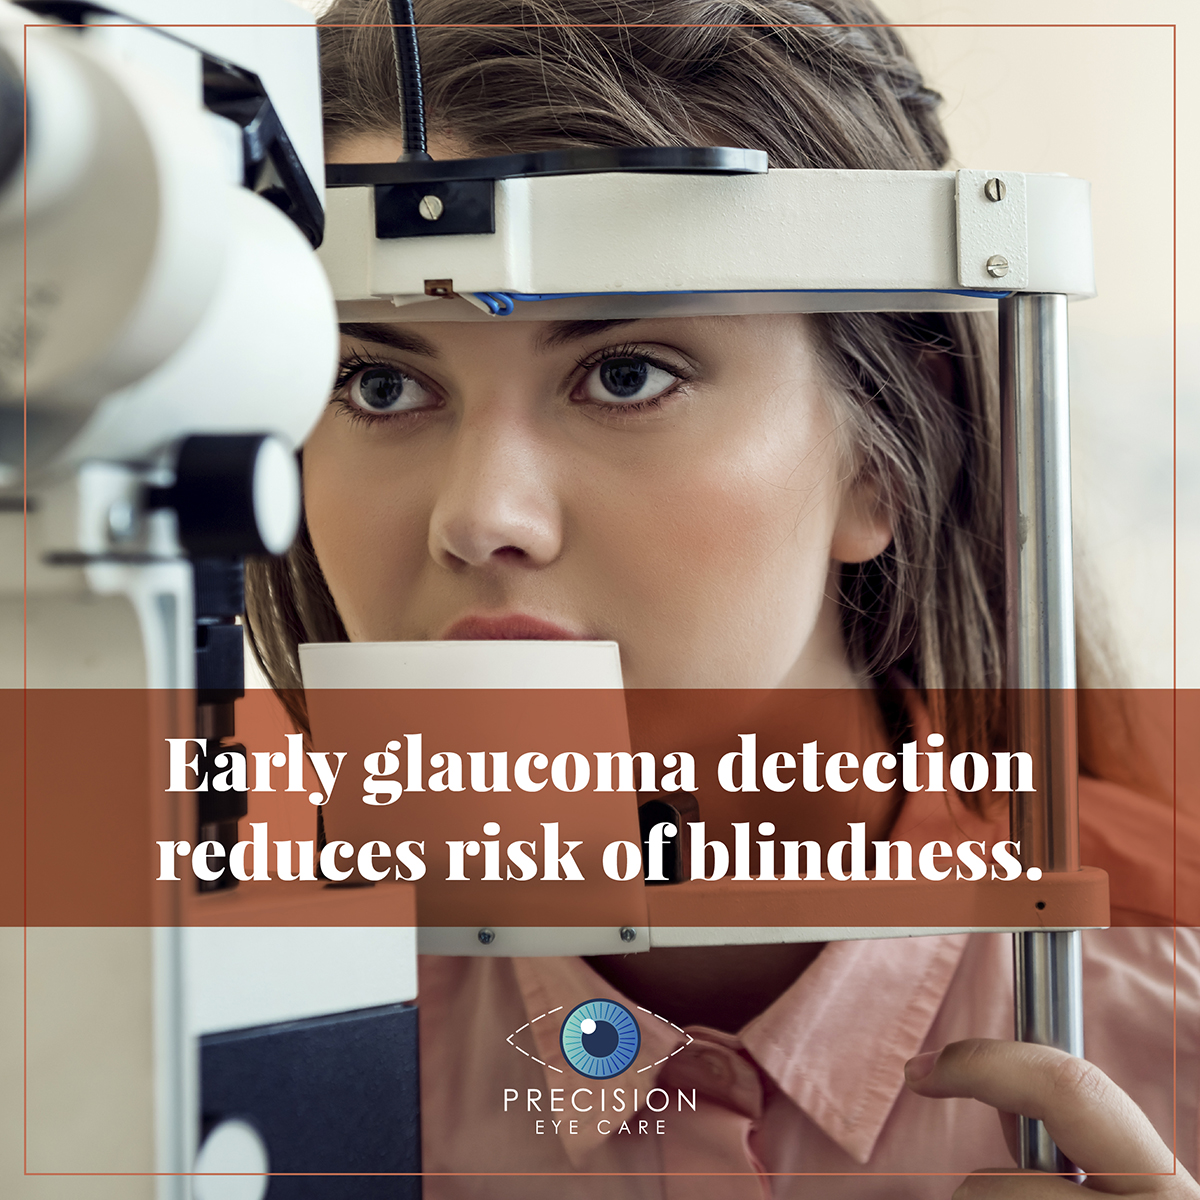 Early glaucoma detection